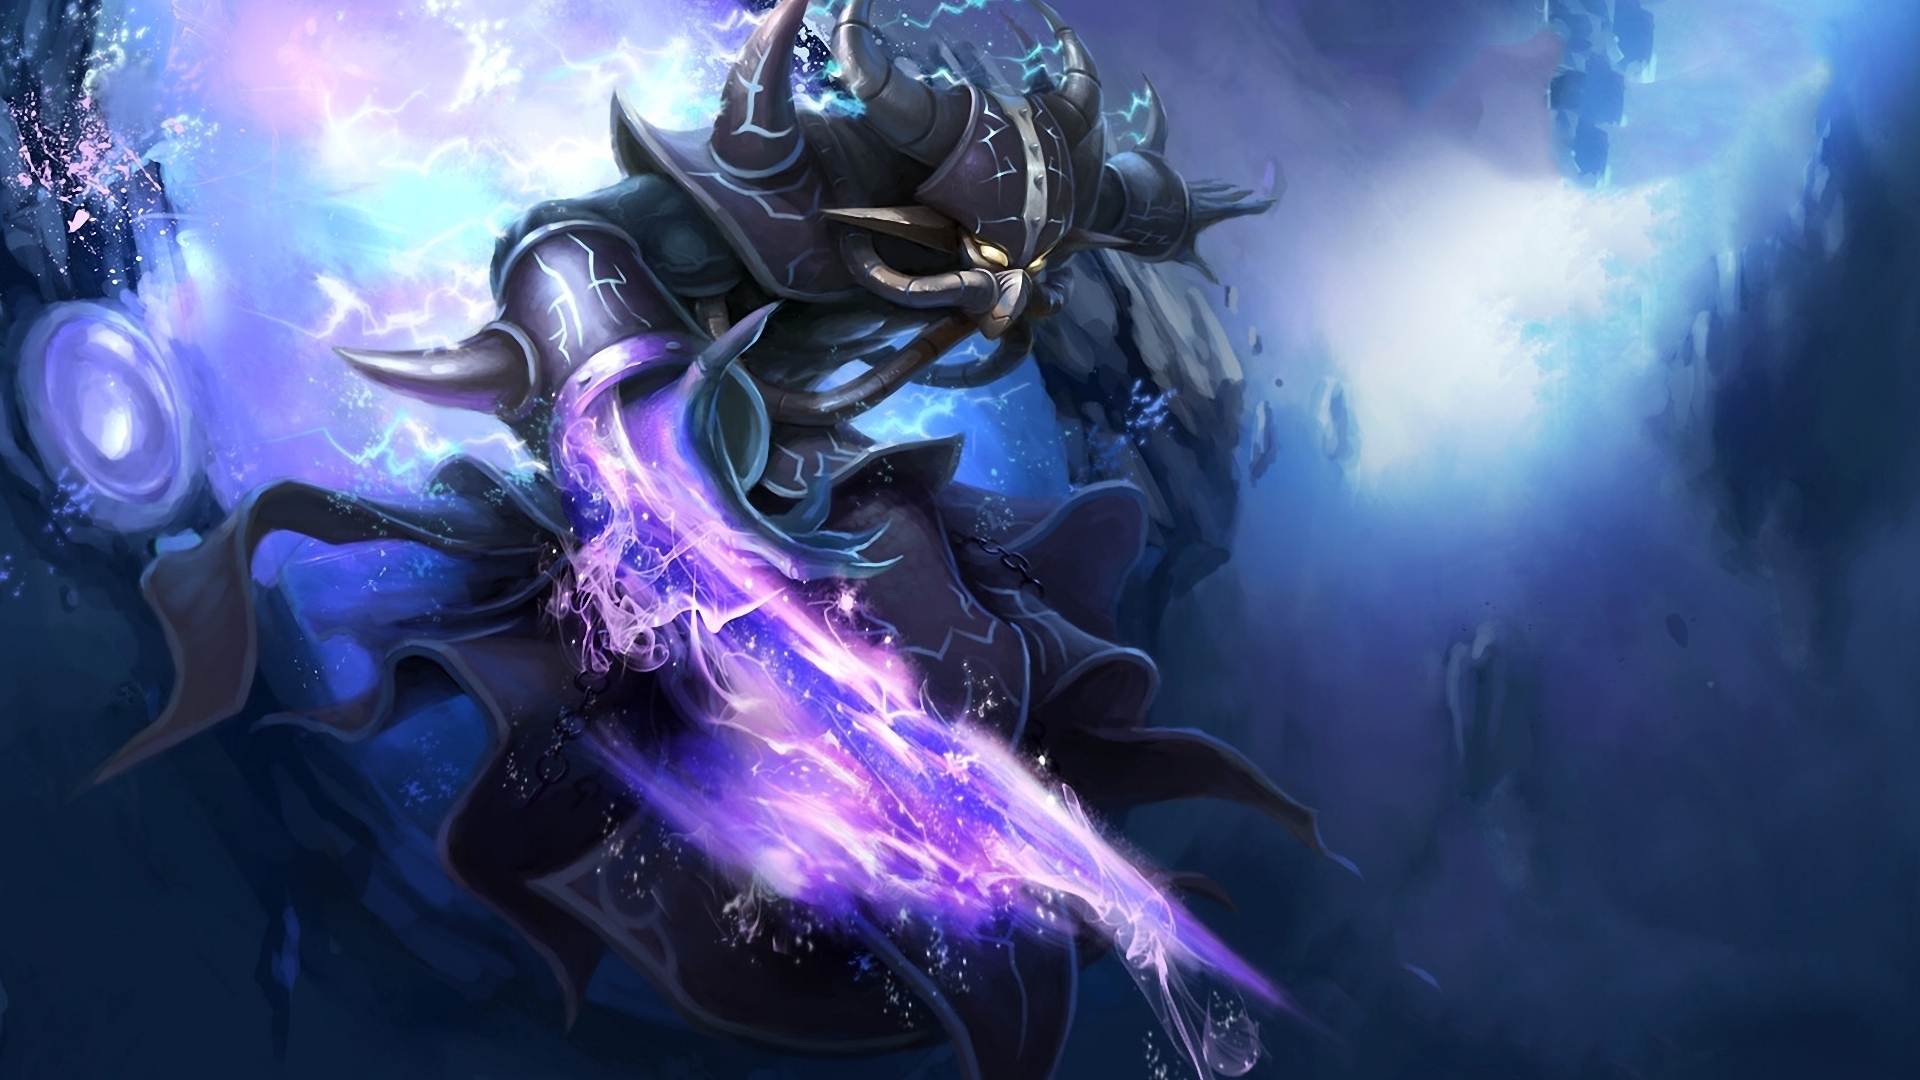 League of Legends Magic Weapons for 1920 x 1080 HDTV 1080p resolution